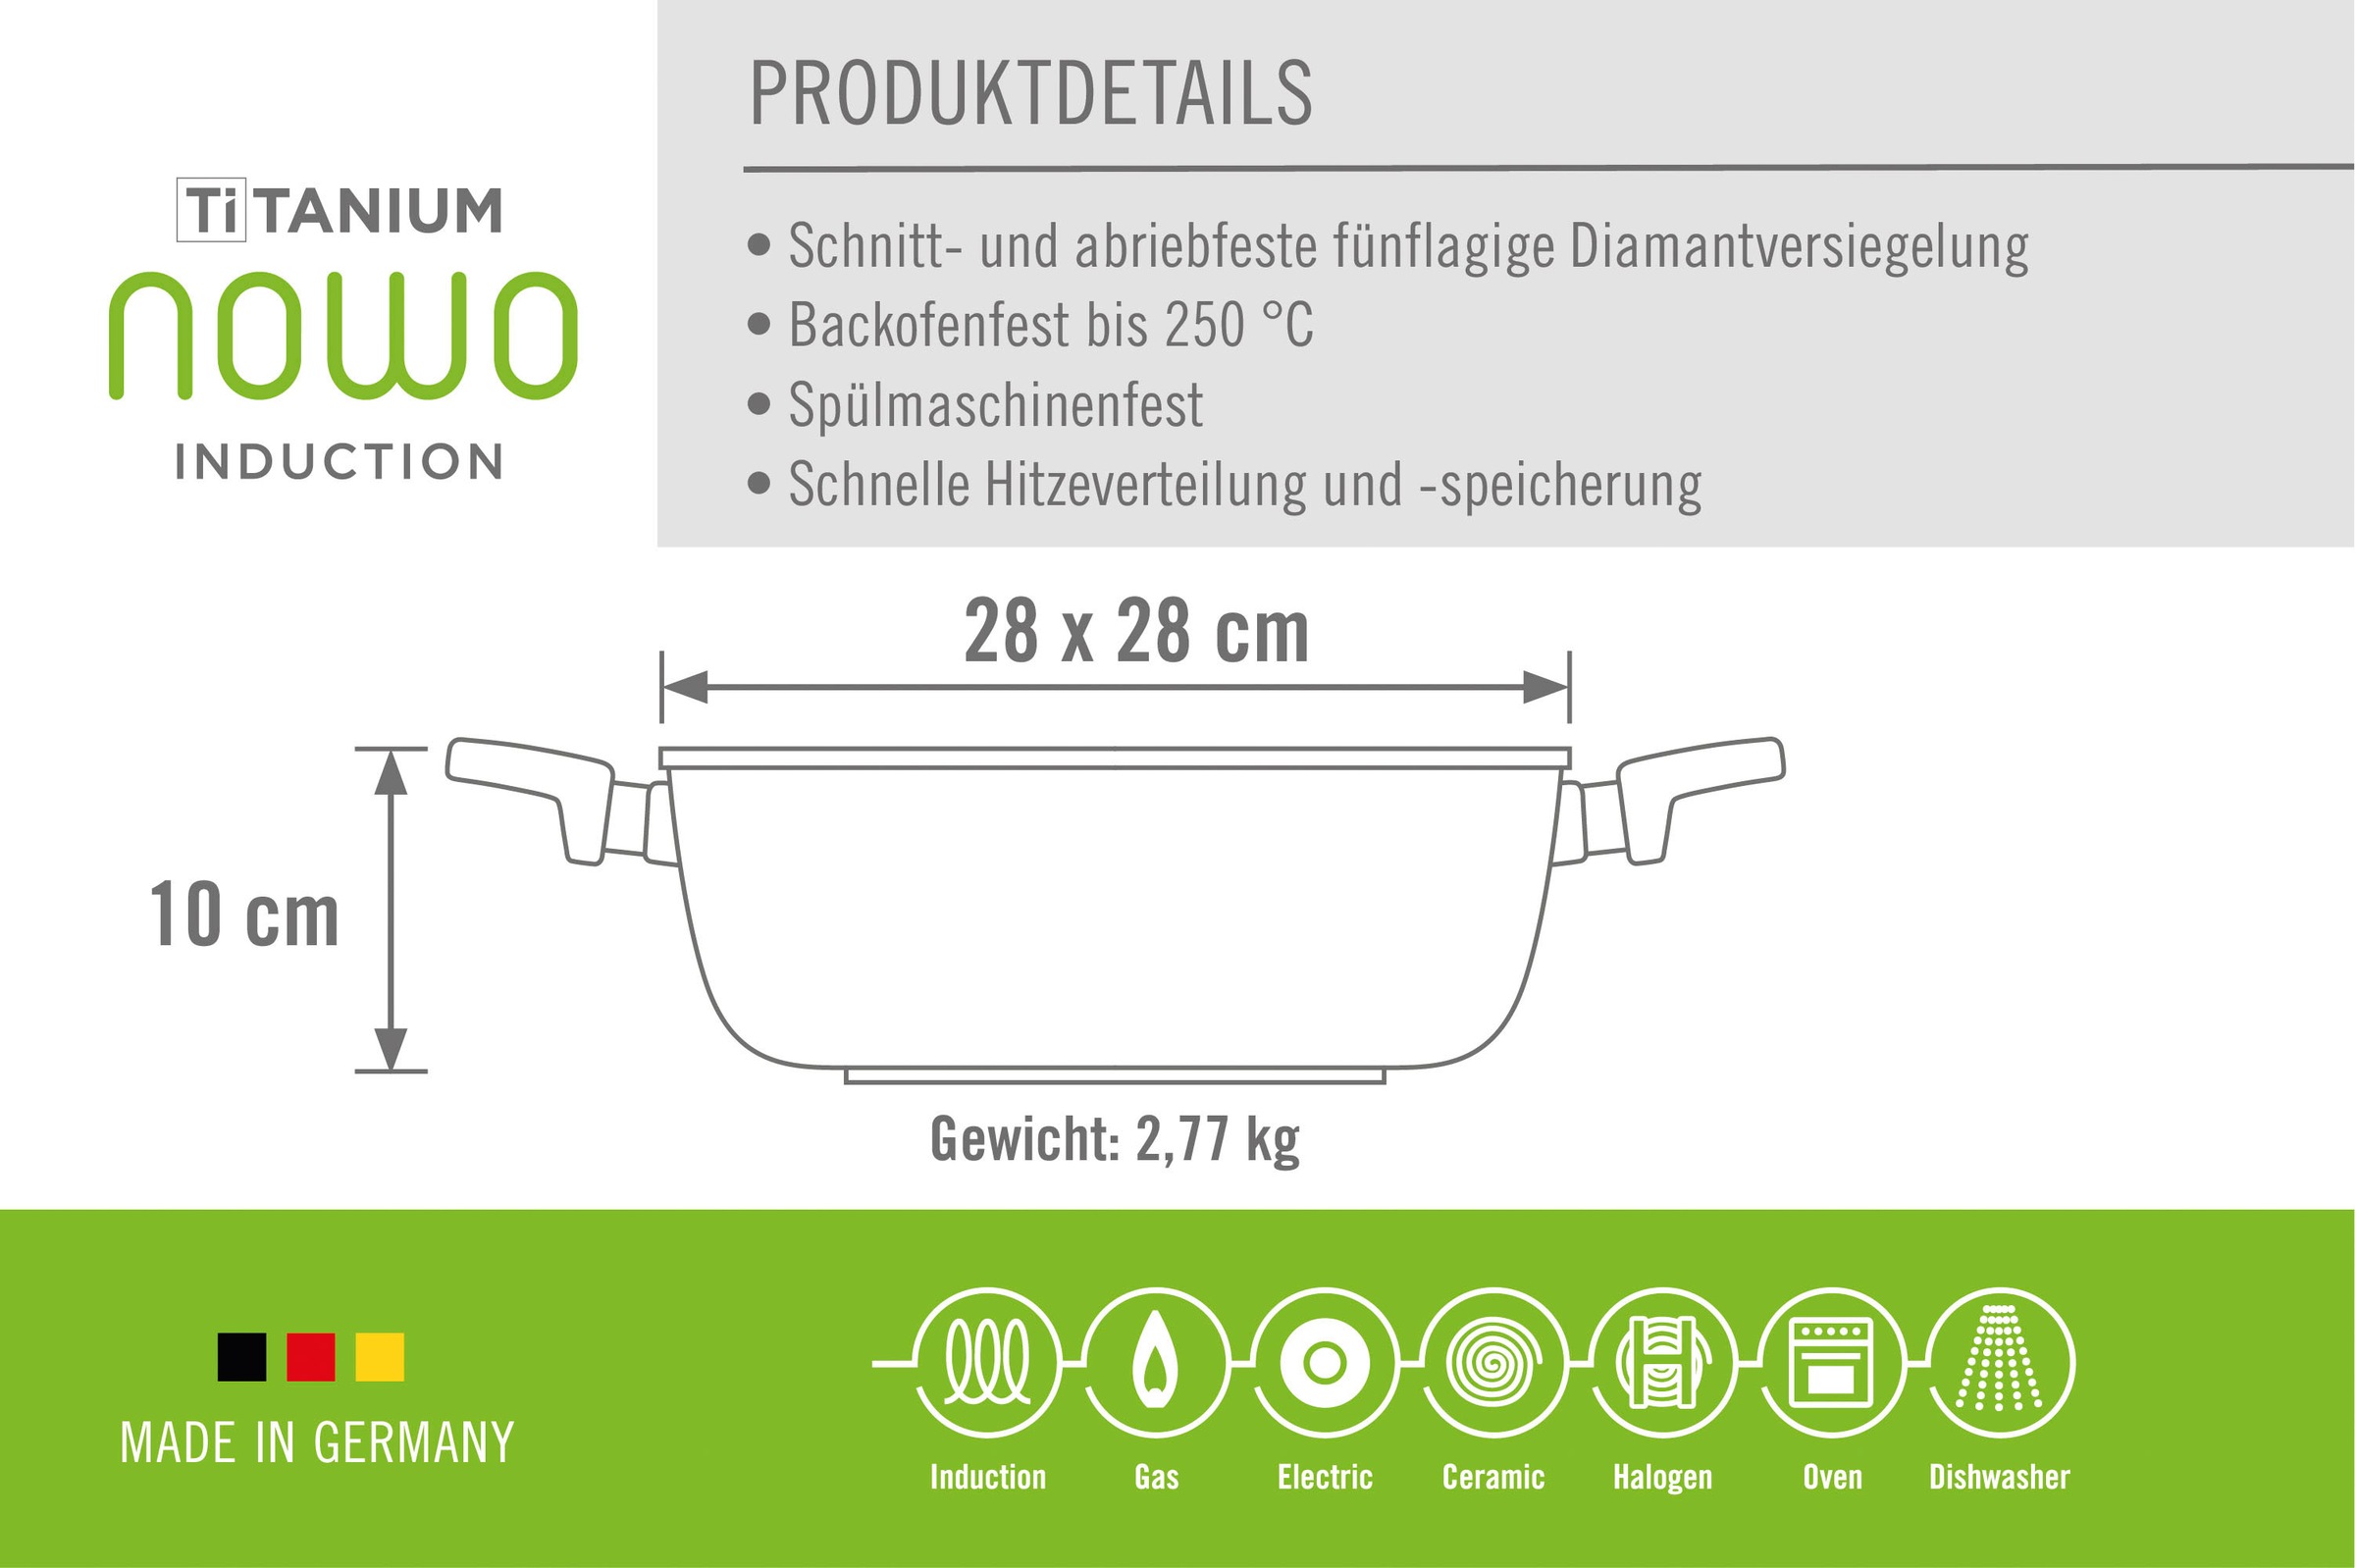 WOLL MADE IN GERMANY Bratpfanne »Nowo Titanium«, Aluminiumguss, 28x28 cm, Induktion, Made in Germany